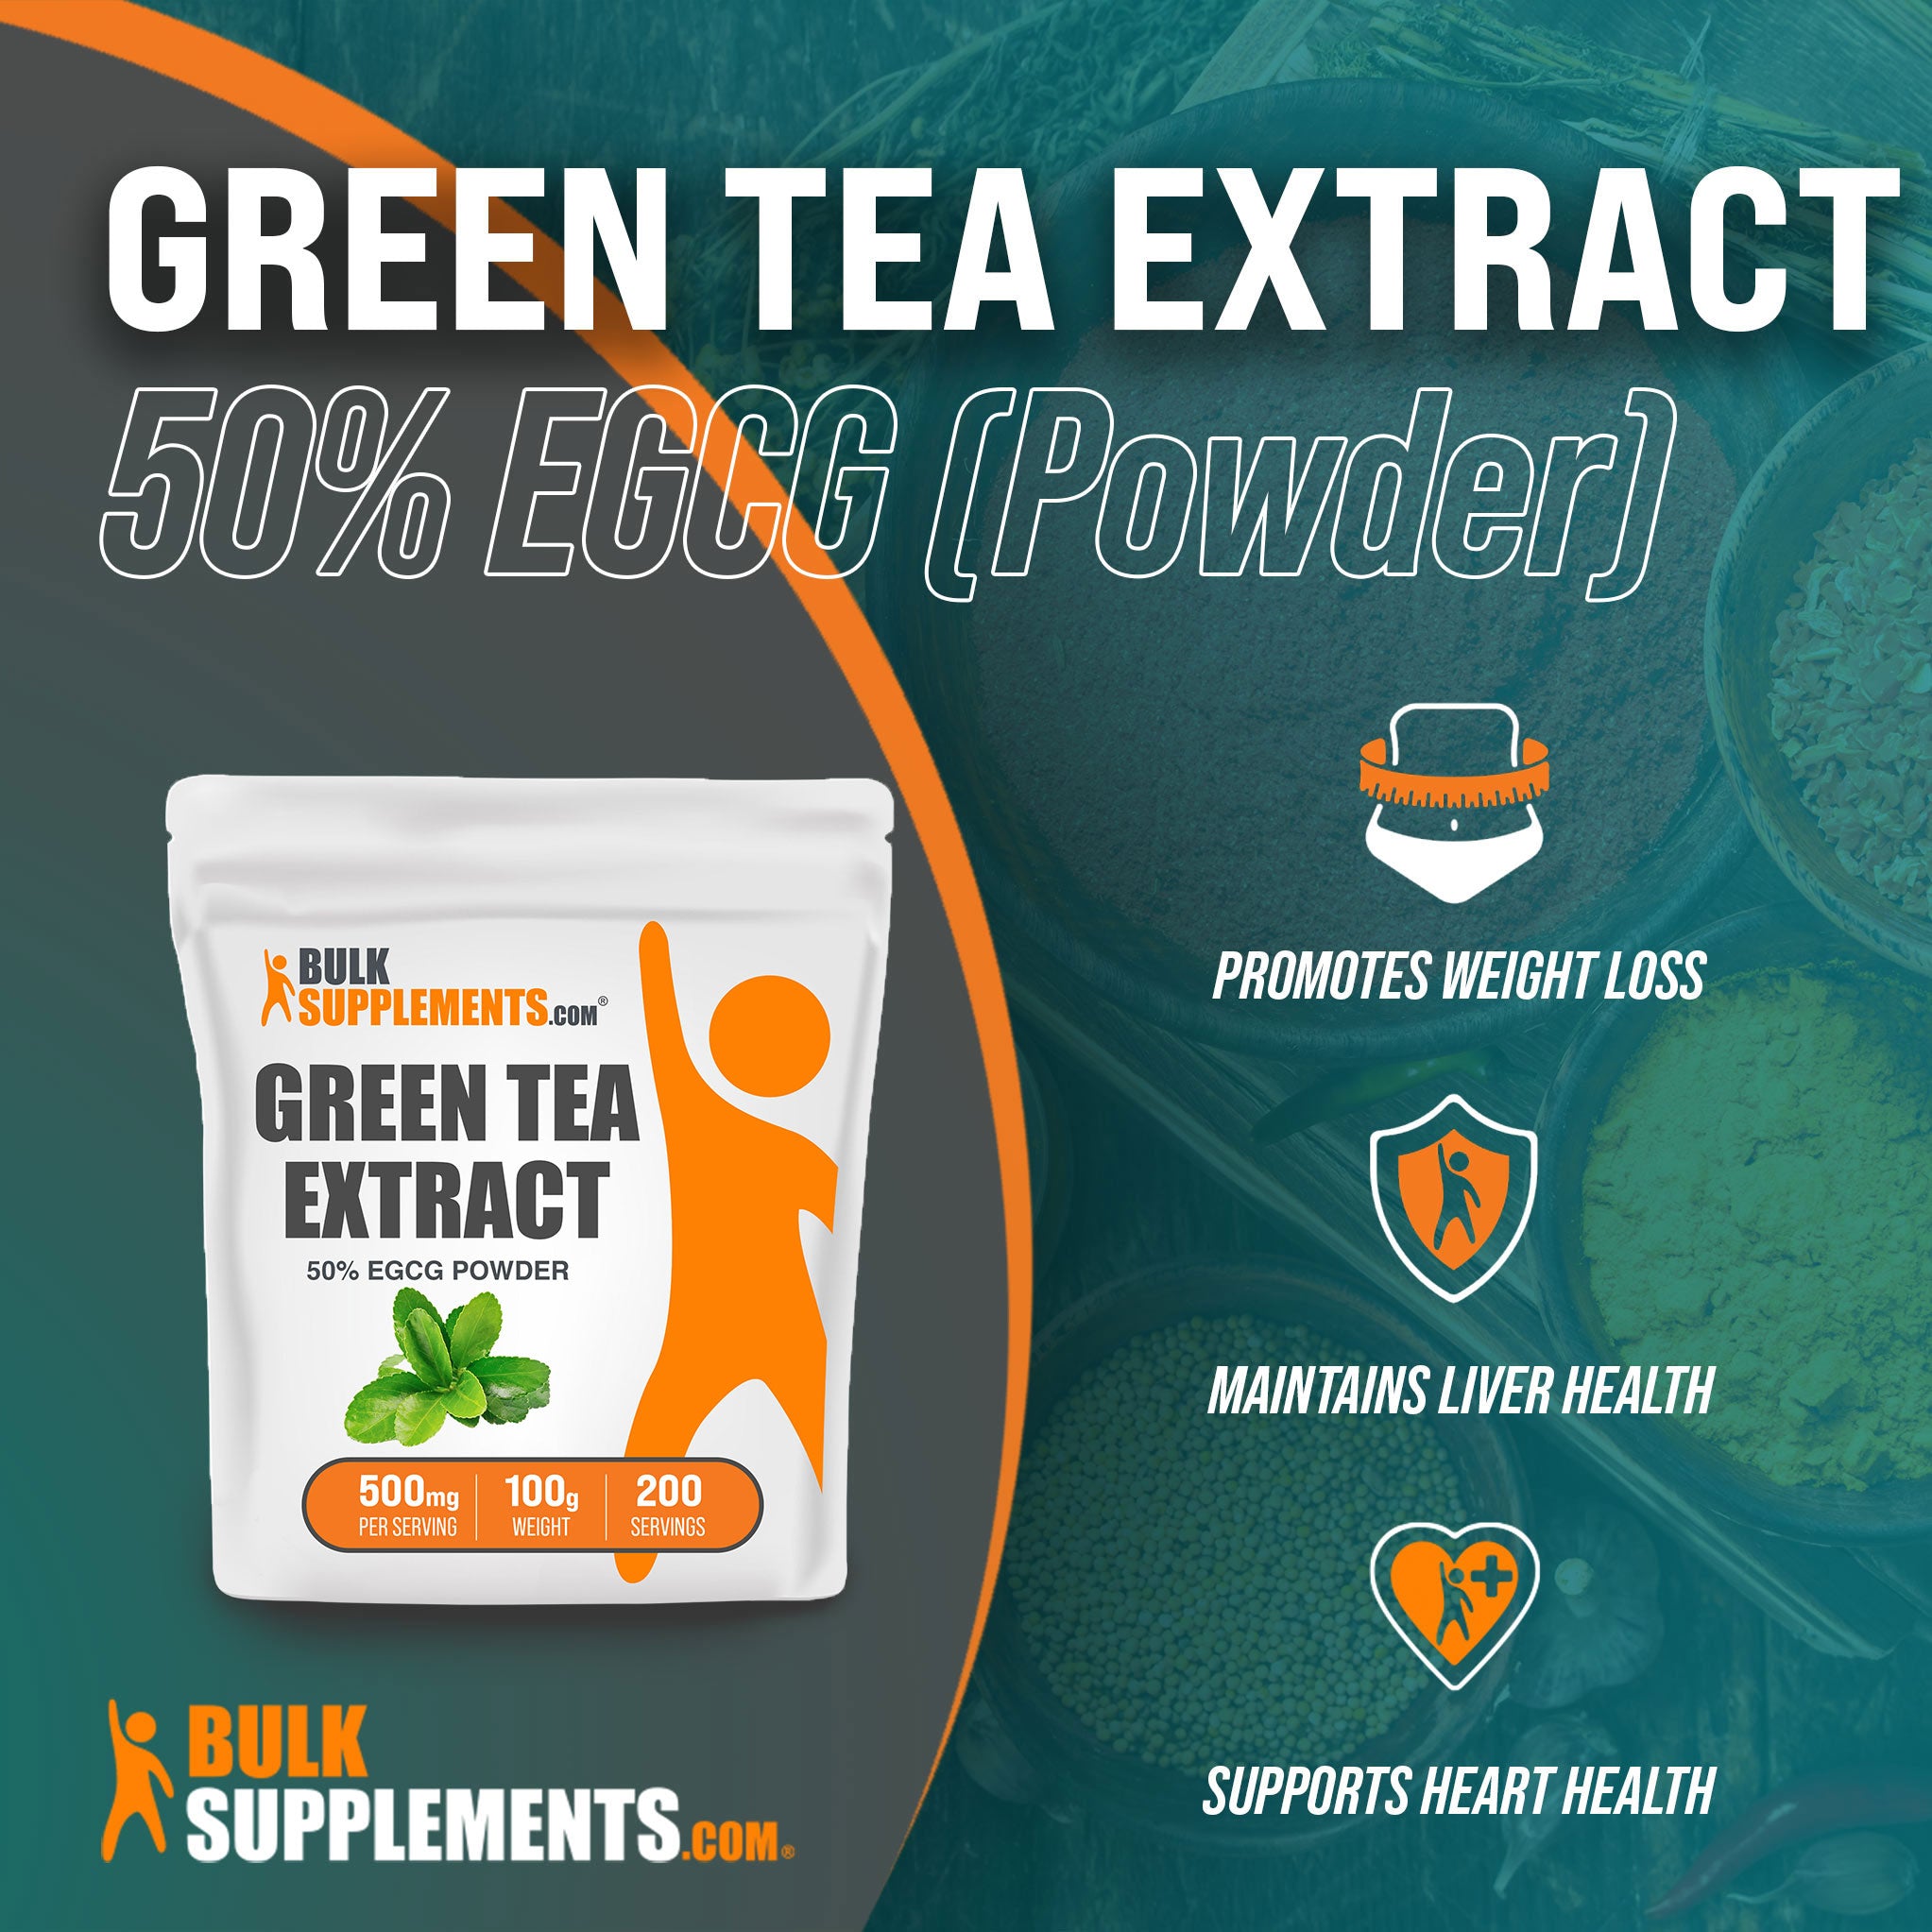 Benefits of Green Tea Extract 50% EGCG; promotes weight loss, maintains liver health, supports heart health